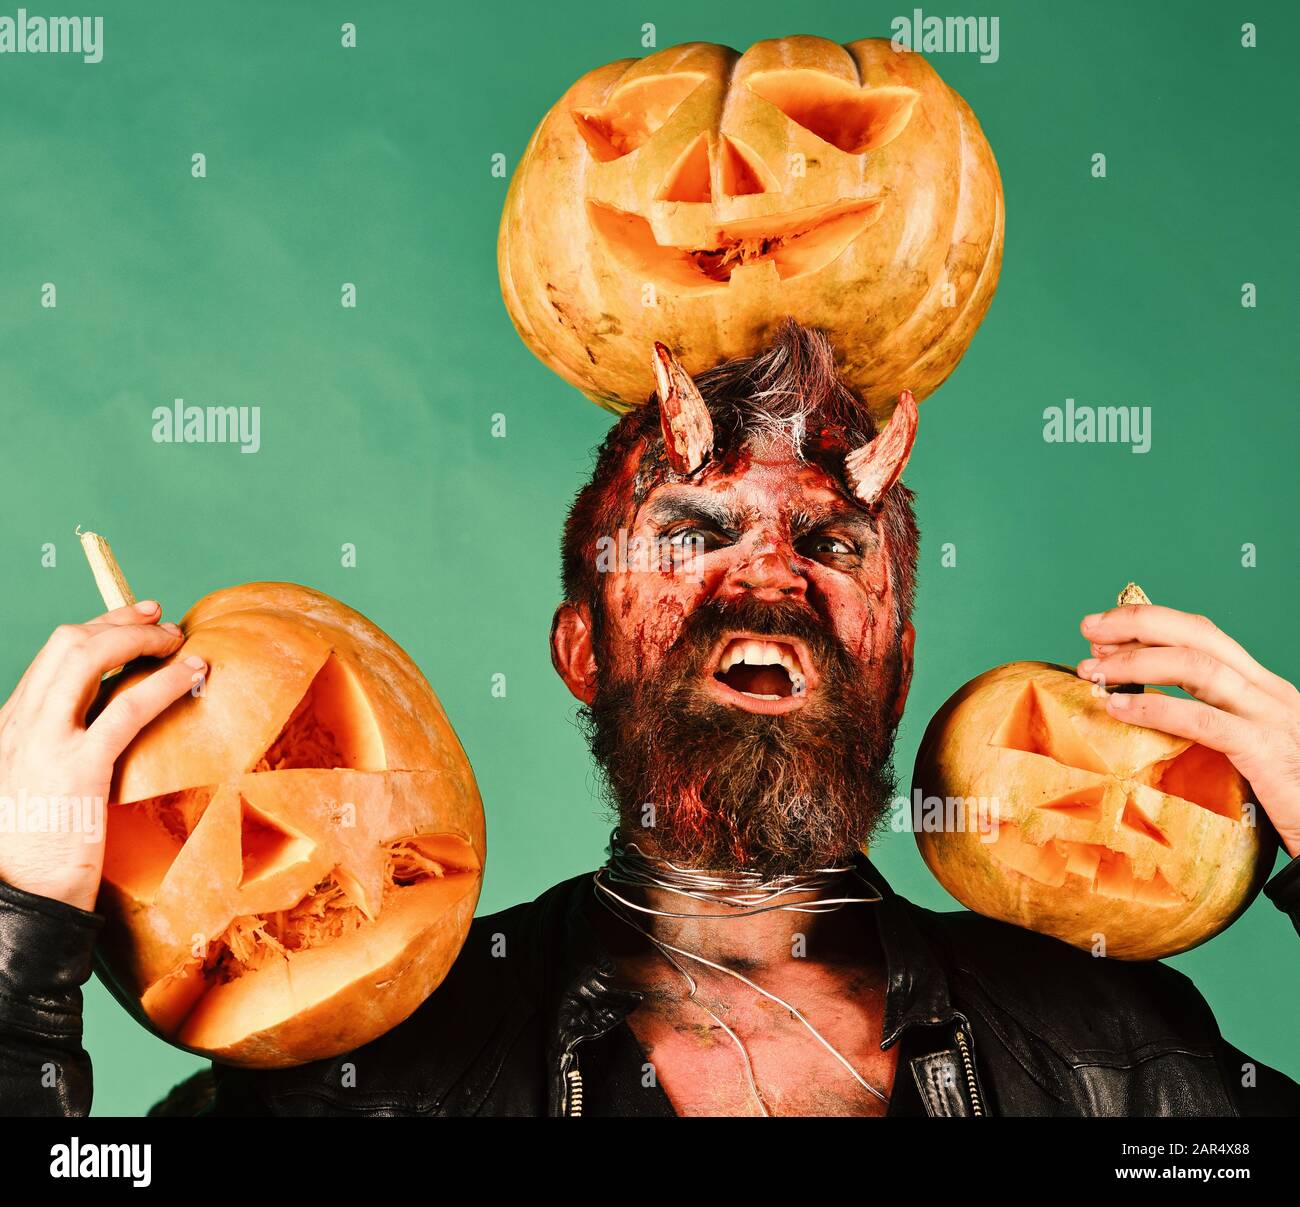 Demon with horns and mad face holds jack o Man wearing scary with Halloween pumpkins and bats decor on background. Halloween costume party concept. Devil or monster makes decorations Stock Photo - Alamy